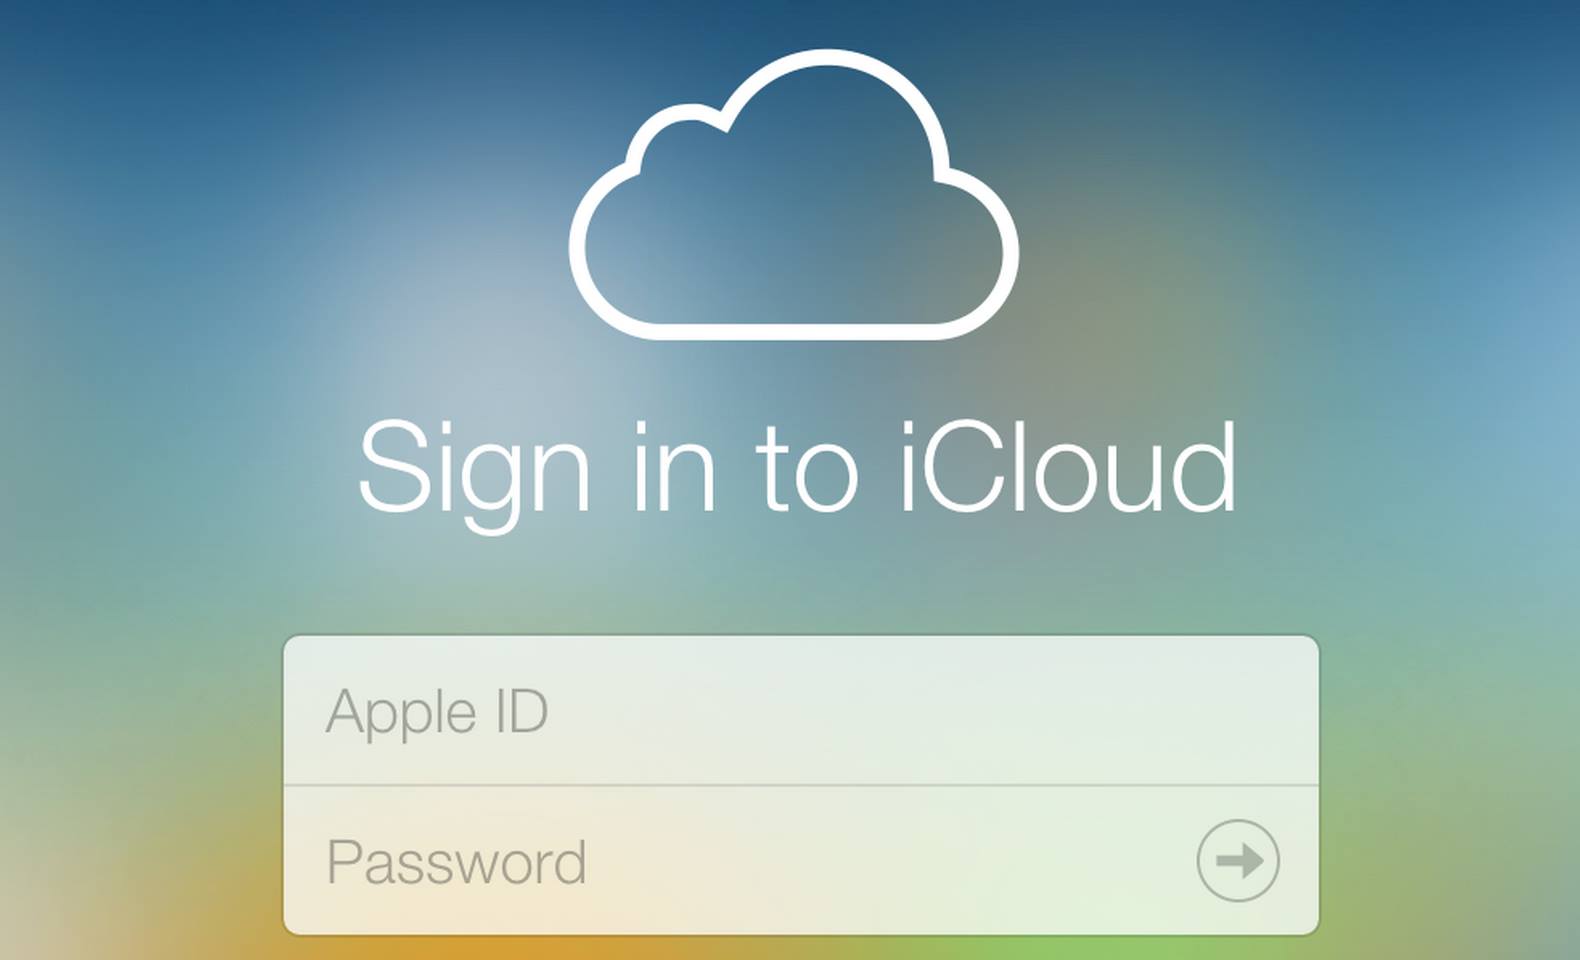 How can I Bypass iCloud Activation on iPhone?